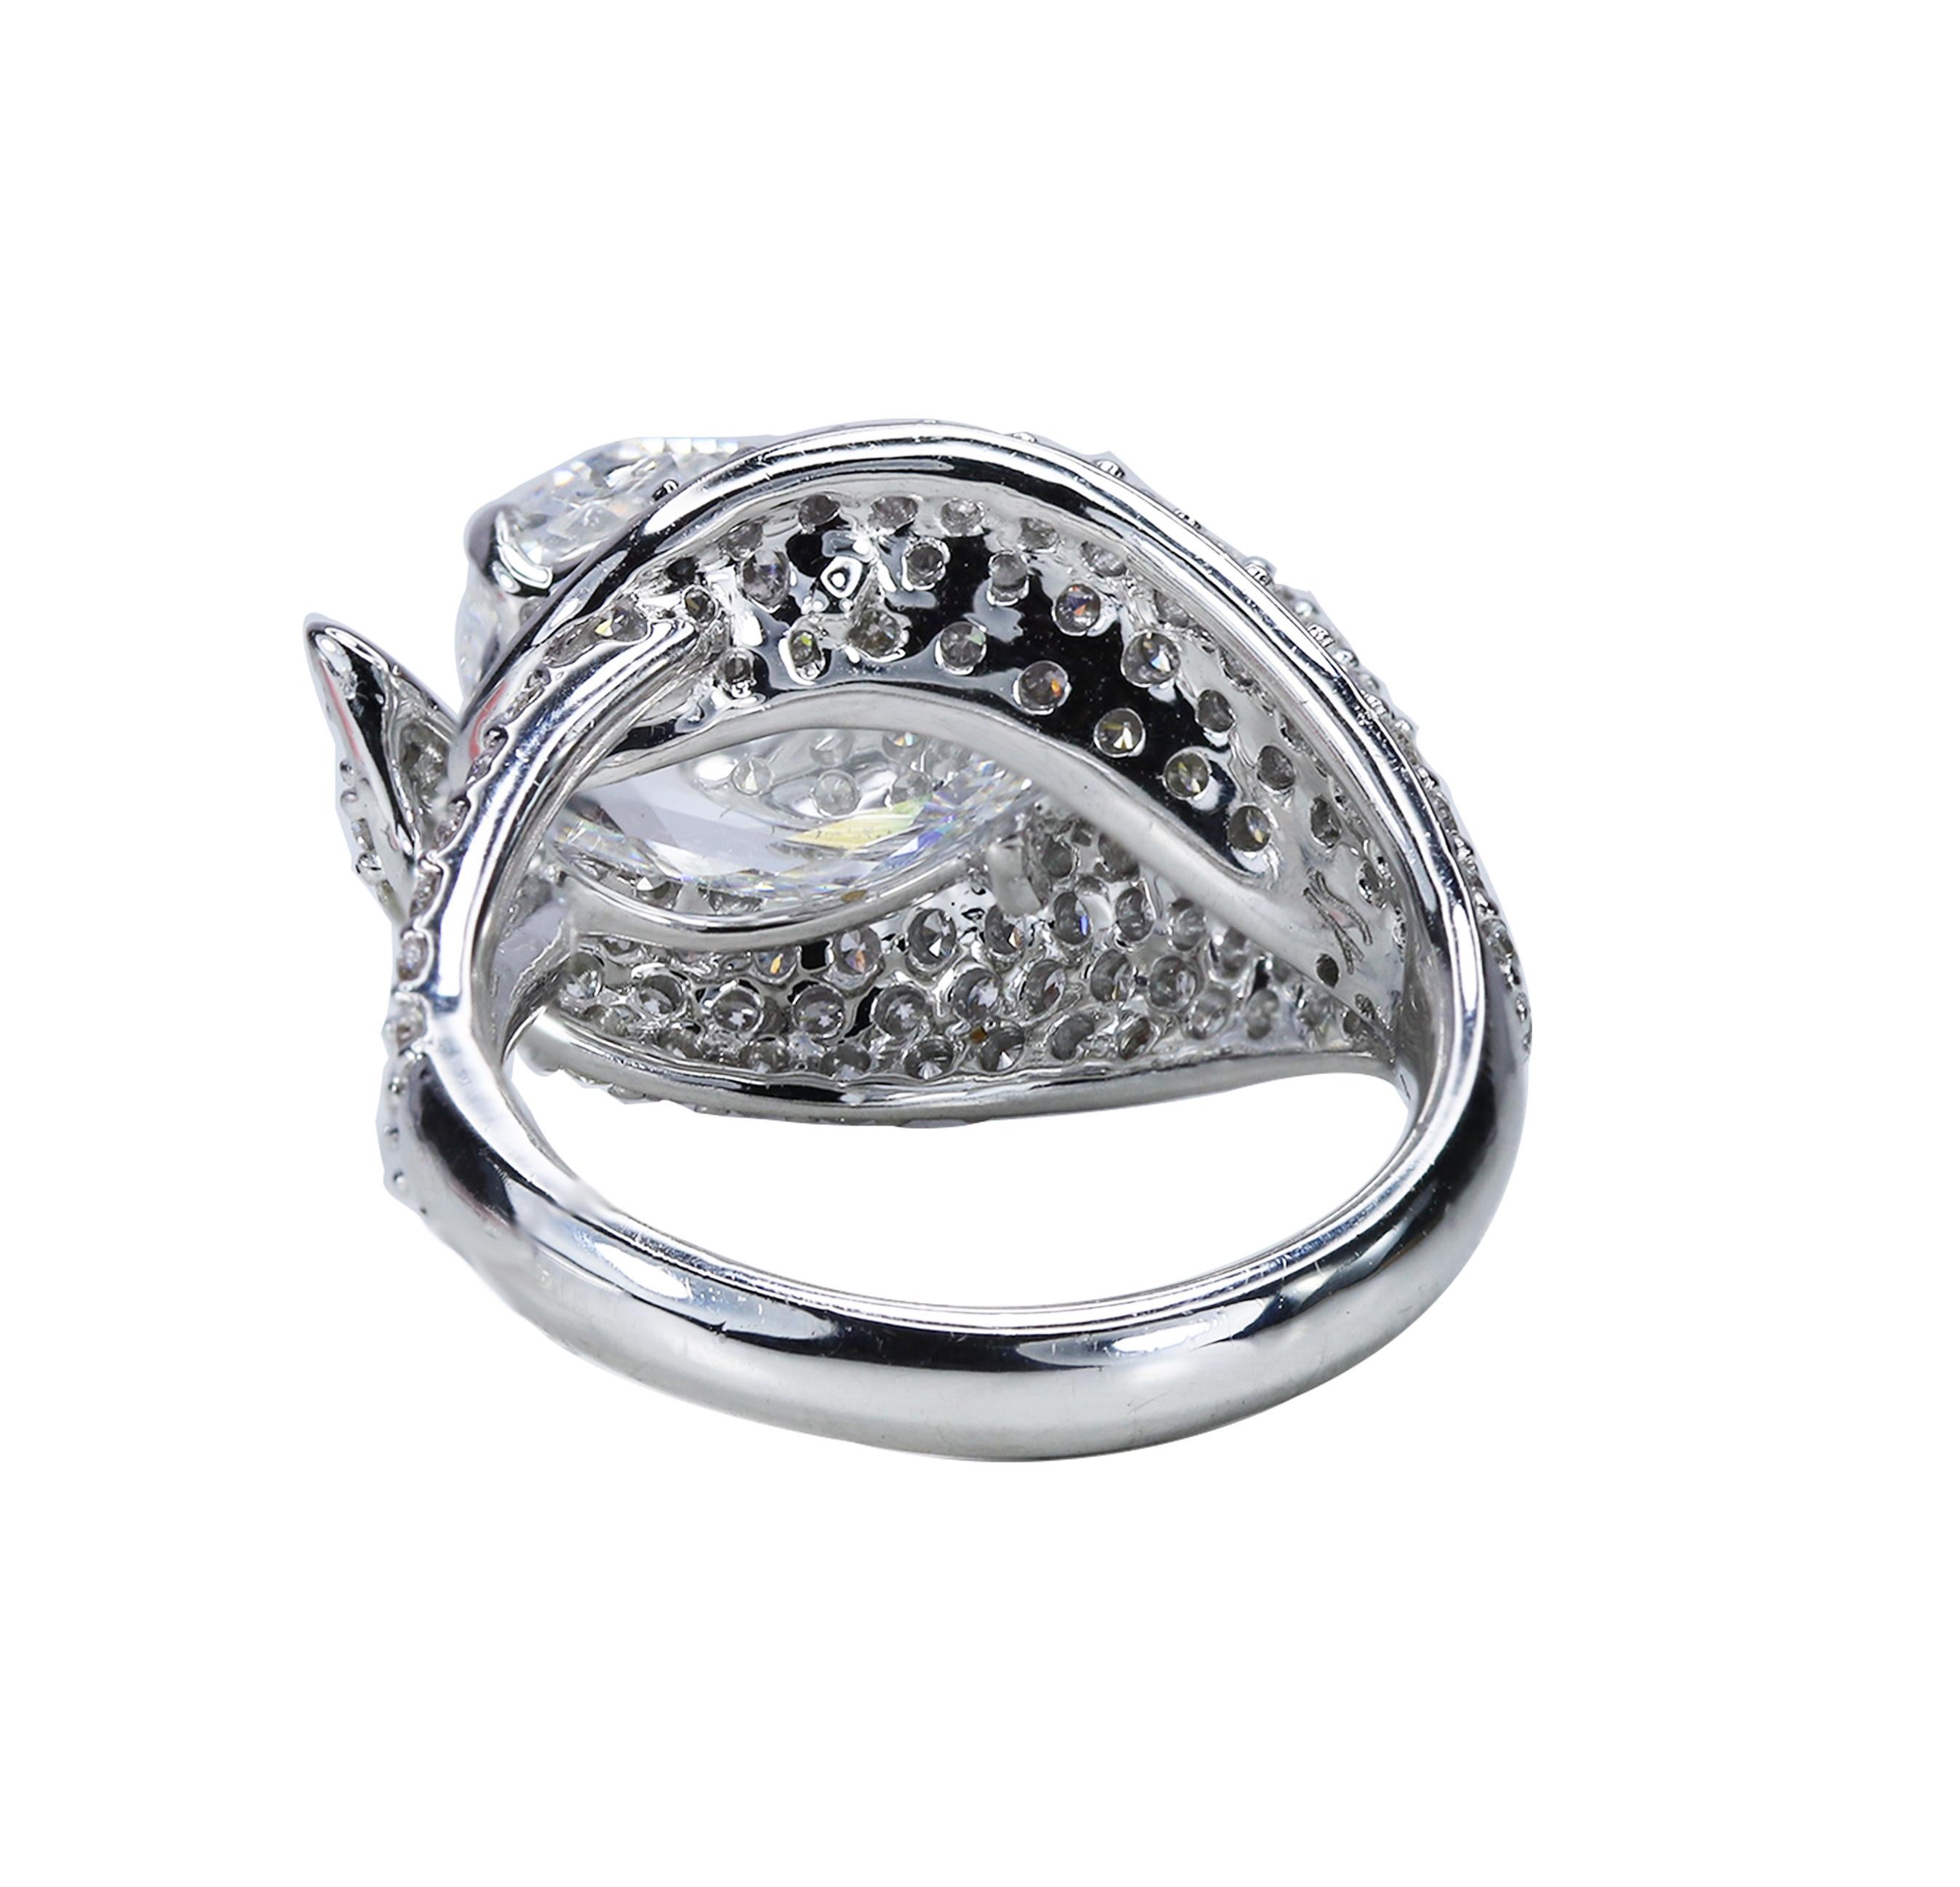 Women's Studio Rêves 18K White Gold and 3.30 Carat Pear Rose cut Cocktail Ring